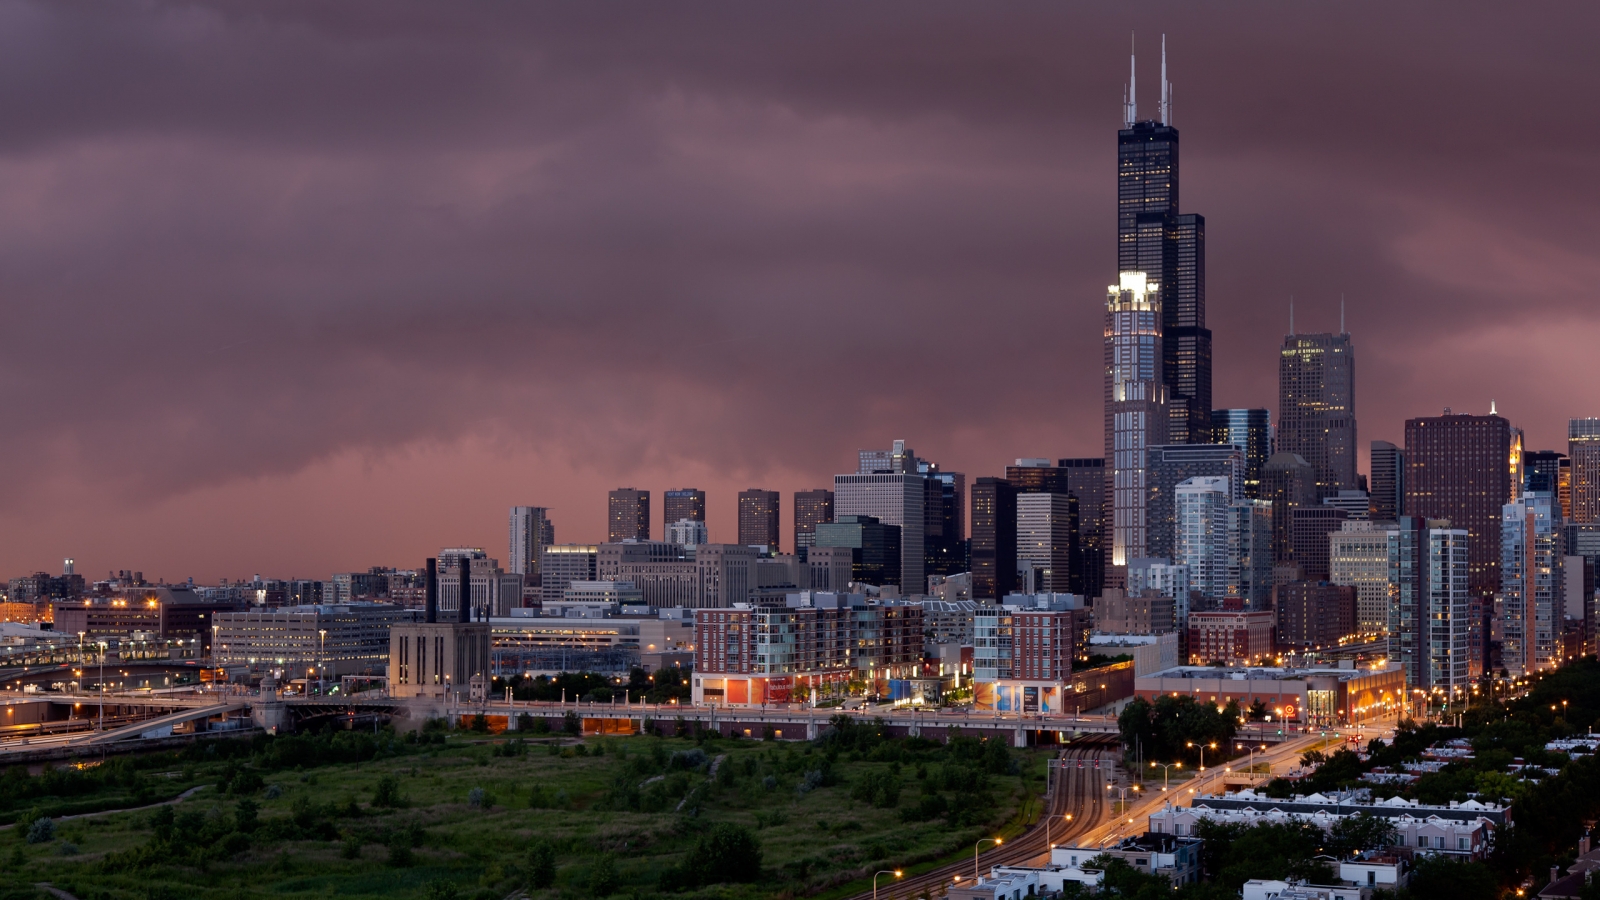 Sunset and Storm in Chicago for 1600 x 900 HDTV resolution